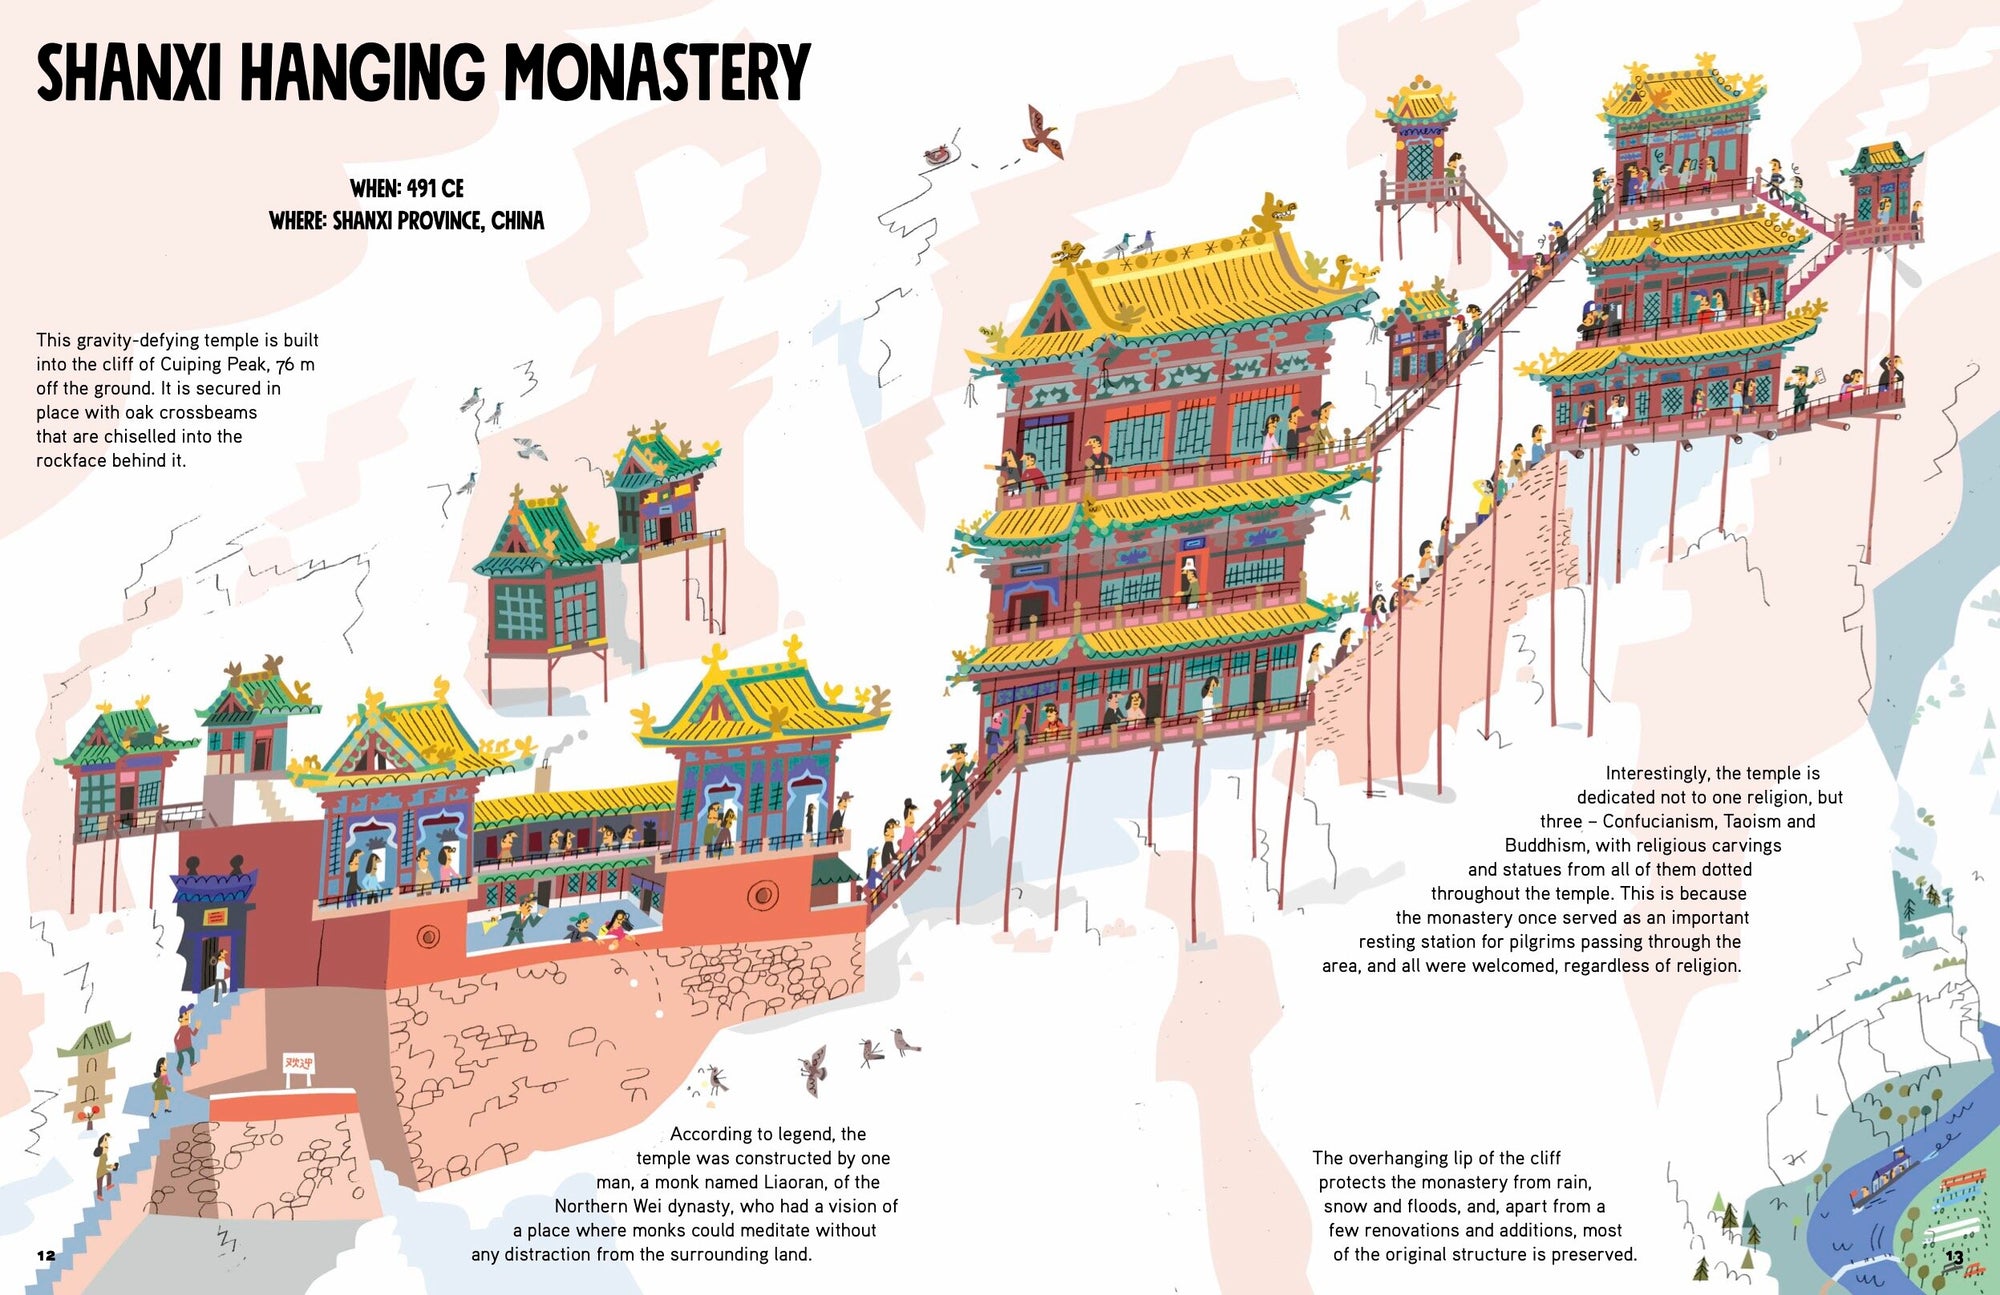 Atlas Of Amazing Architecture: The Most Incredible Buildings You've (probably) Never Heard Of